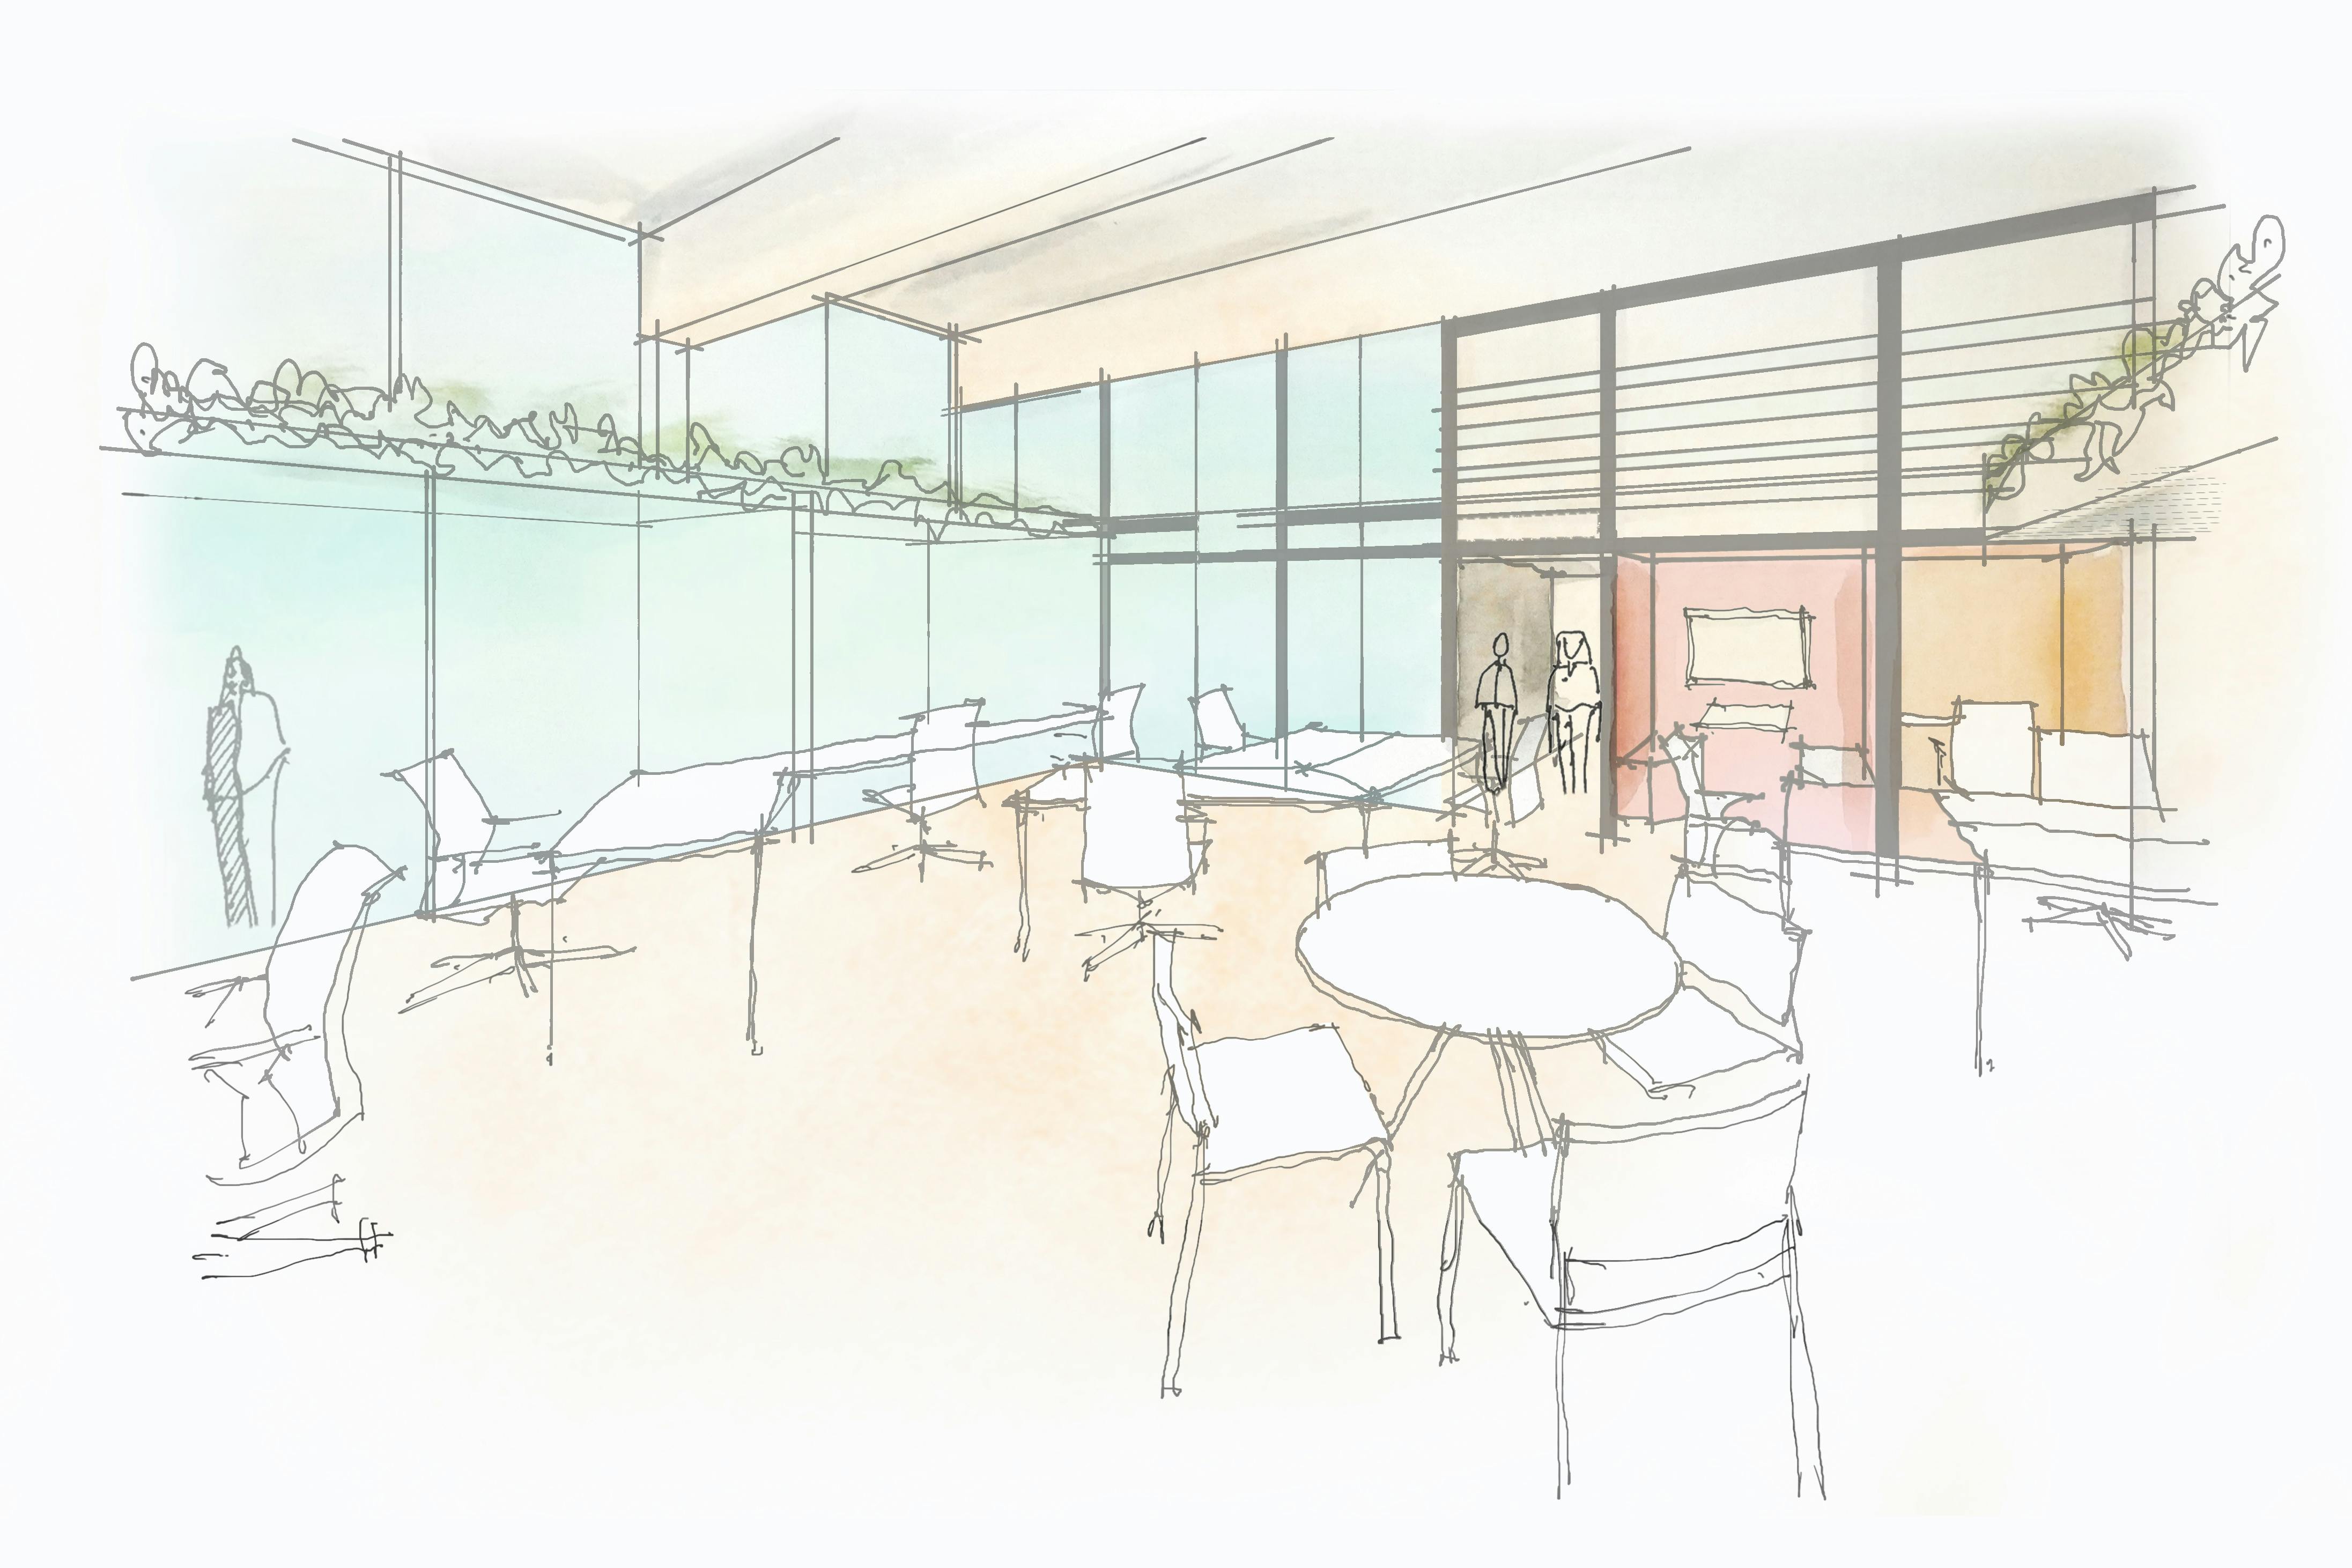 Artist's render of how the cowork space could look